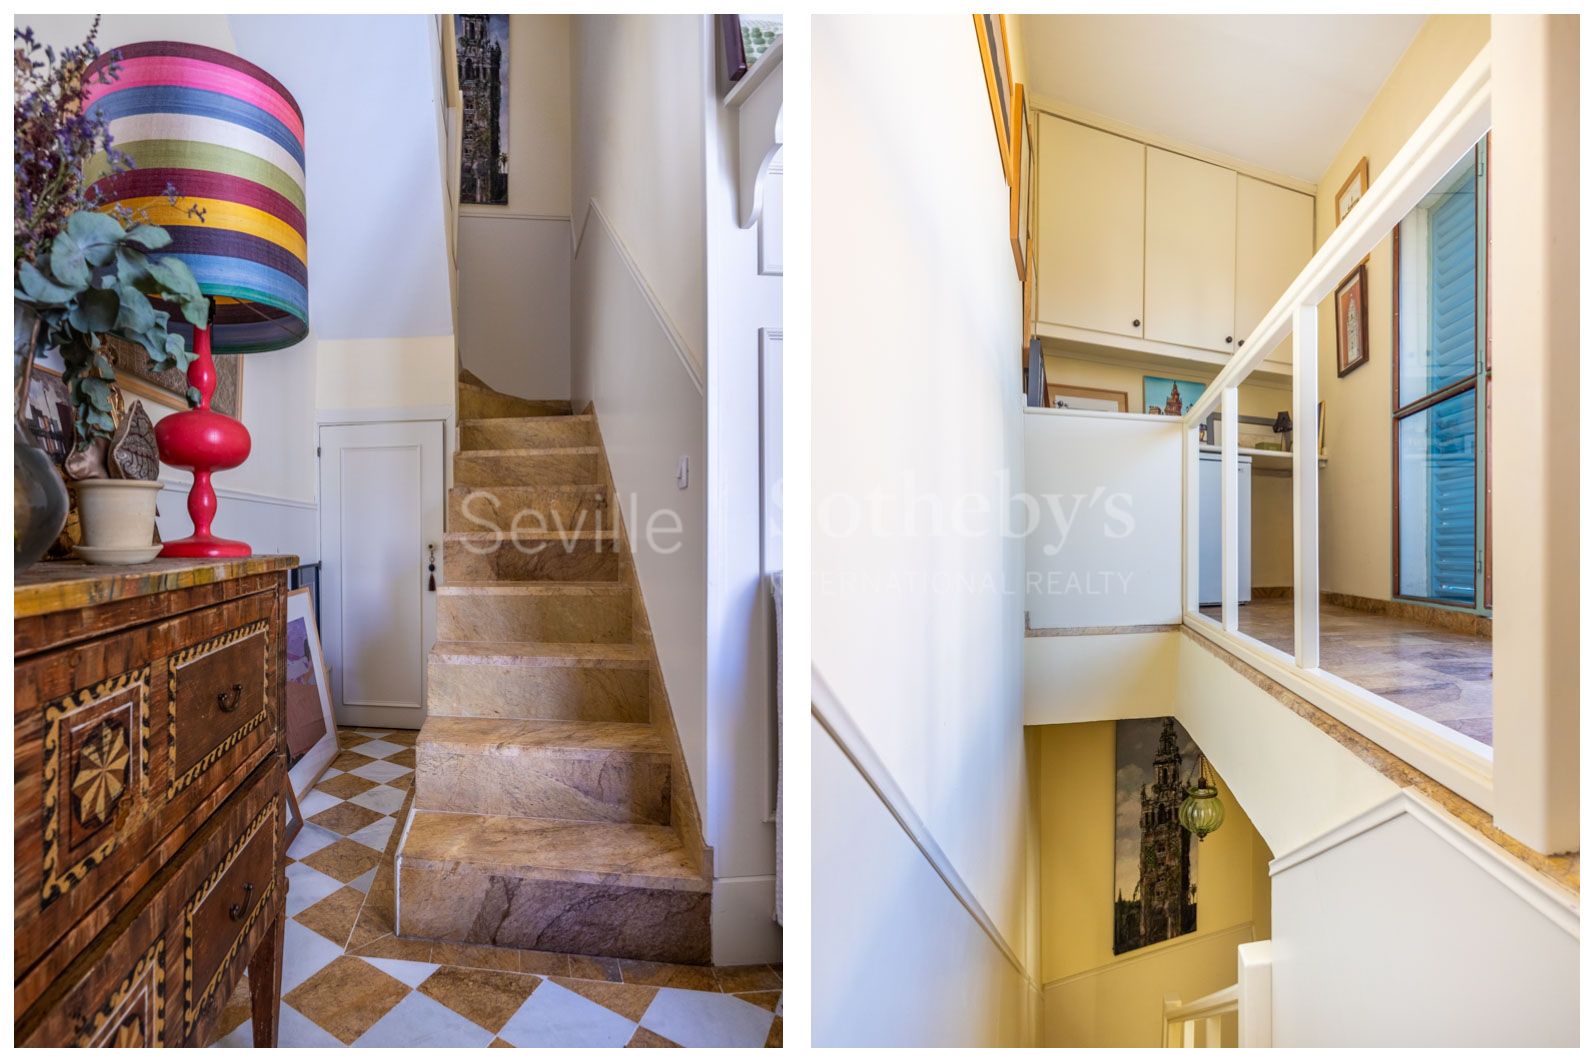 One-of-a-kind apartment with a terrace, swimming pool and singular views of the Giralda.